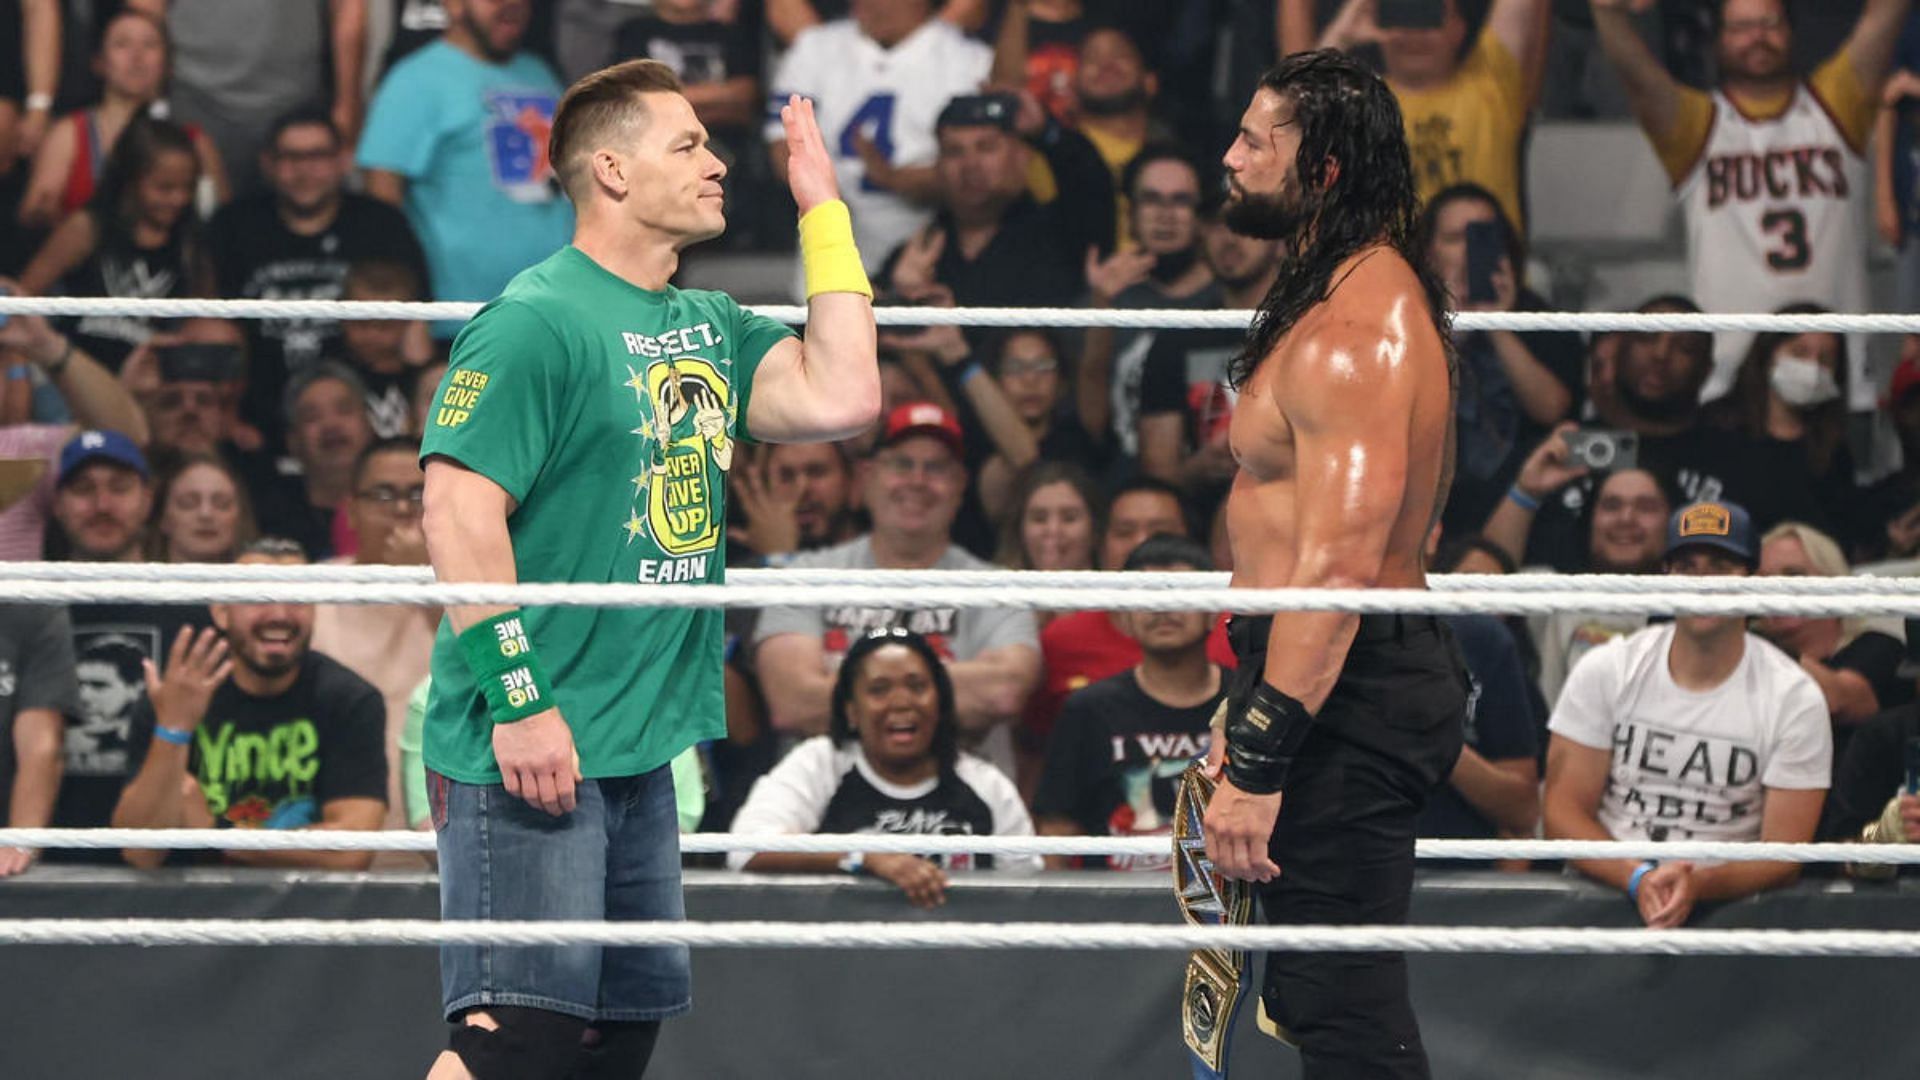 John Cena and Roman Reigns were intense rivals in the past.